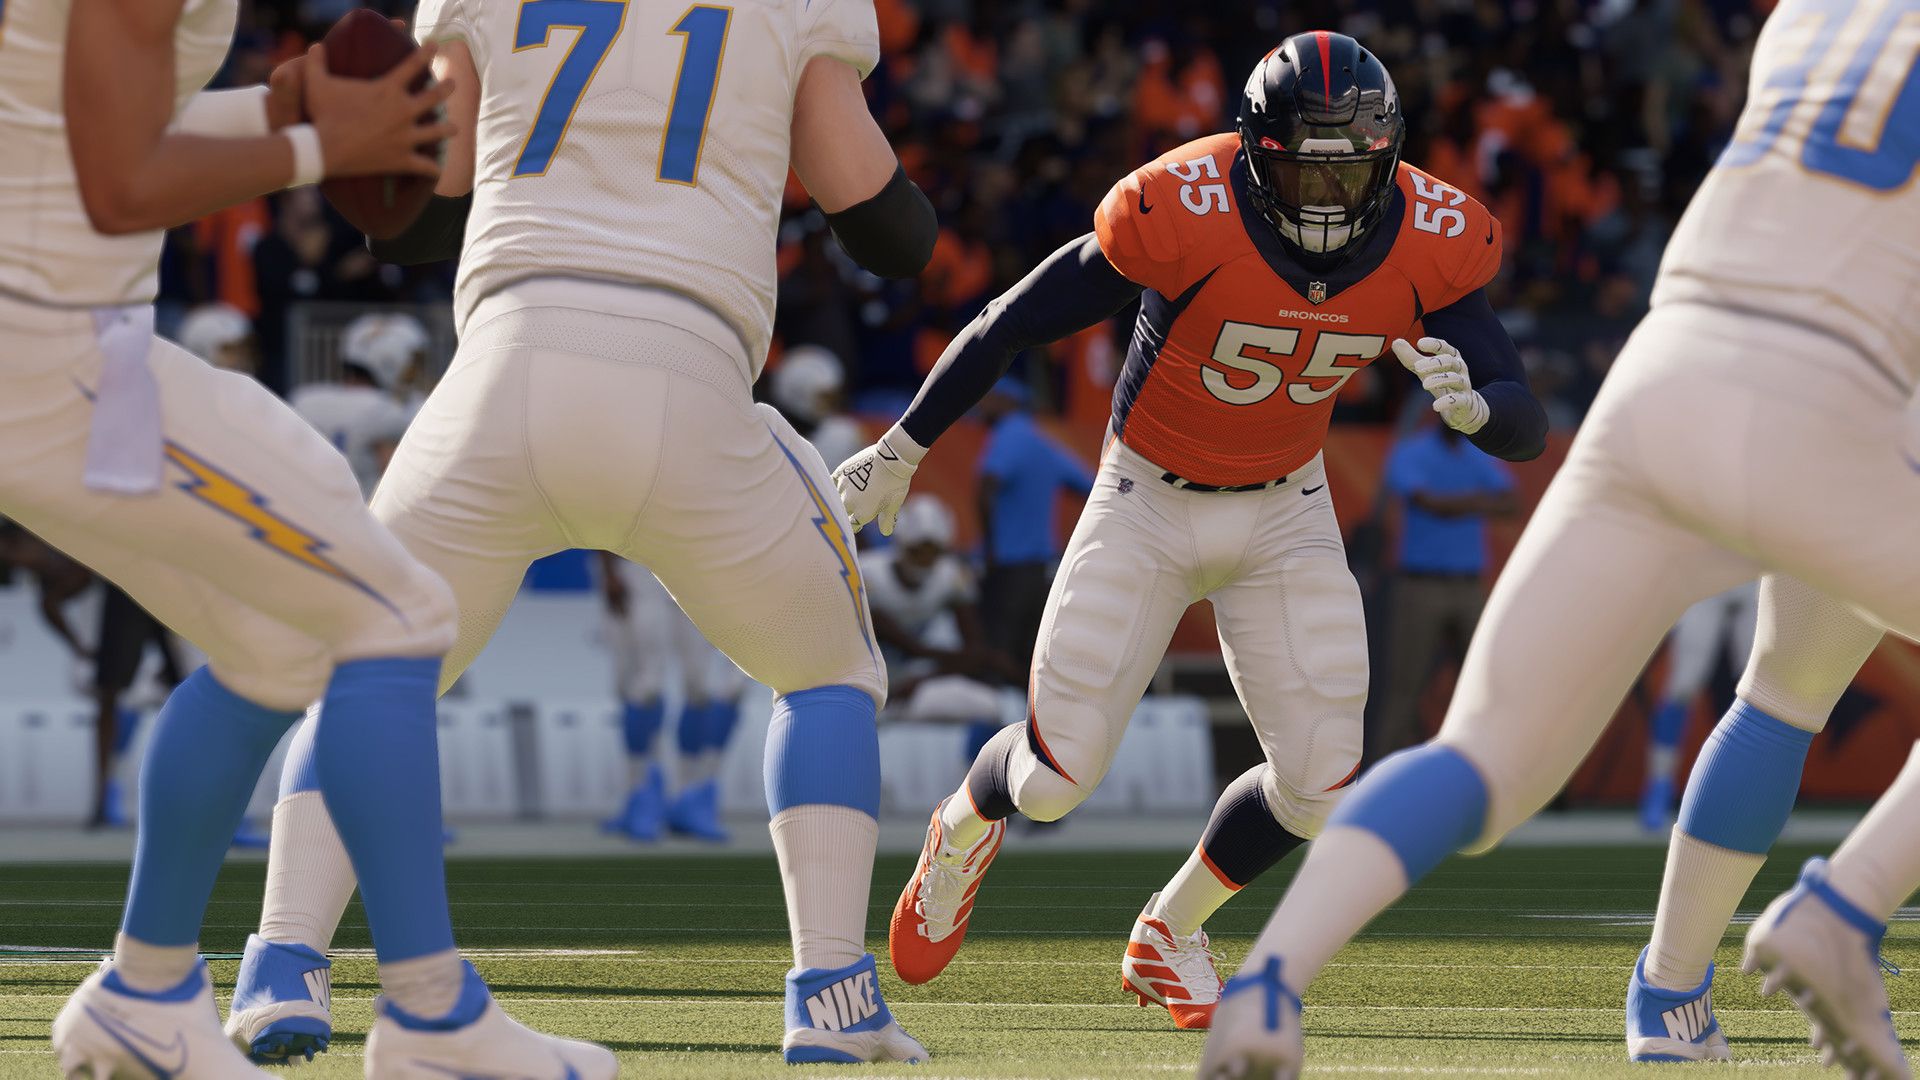 Screenshot of football players competing, from Madden NFL 22